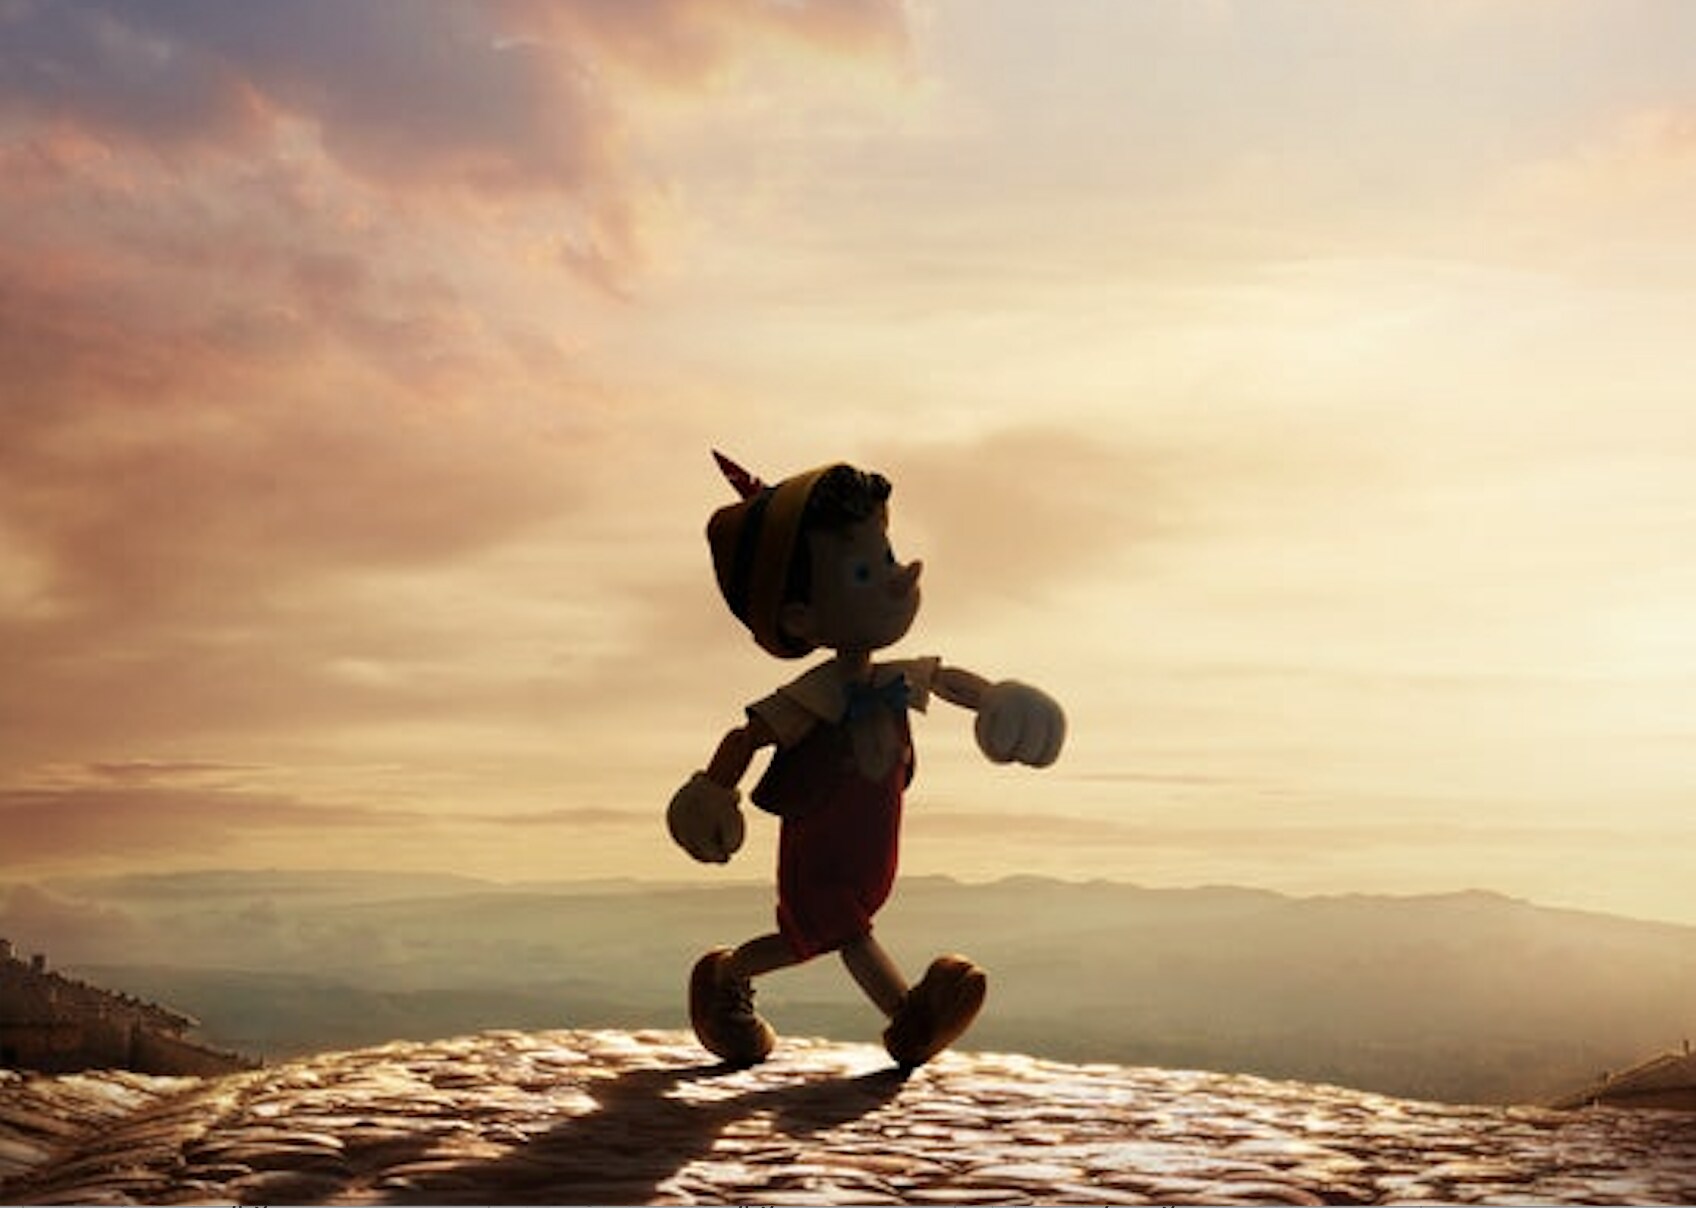 Pinocchio walks into the sunset in the new live-action movie, Pinocchio